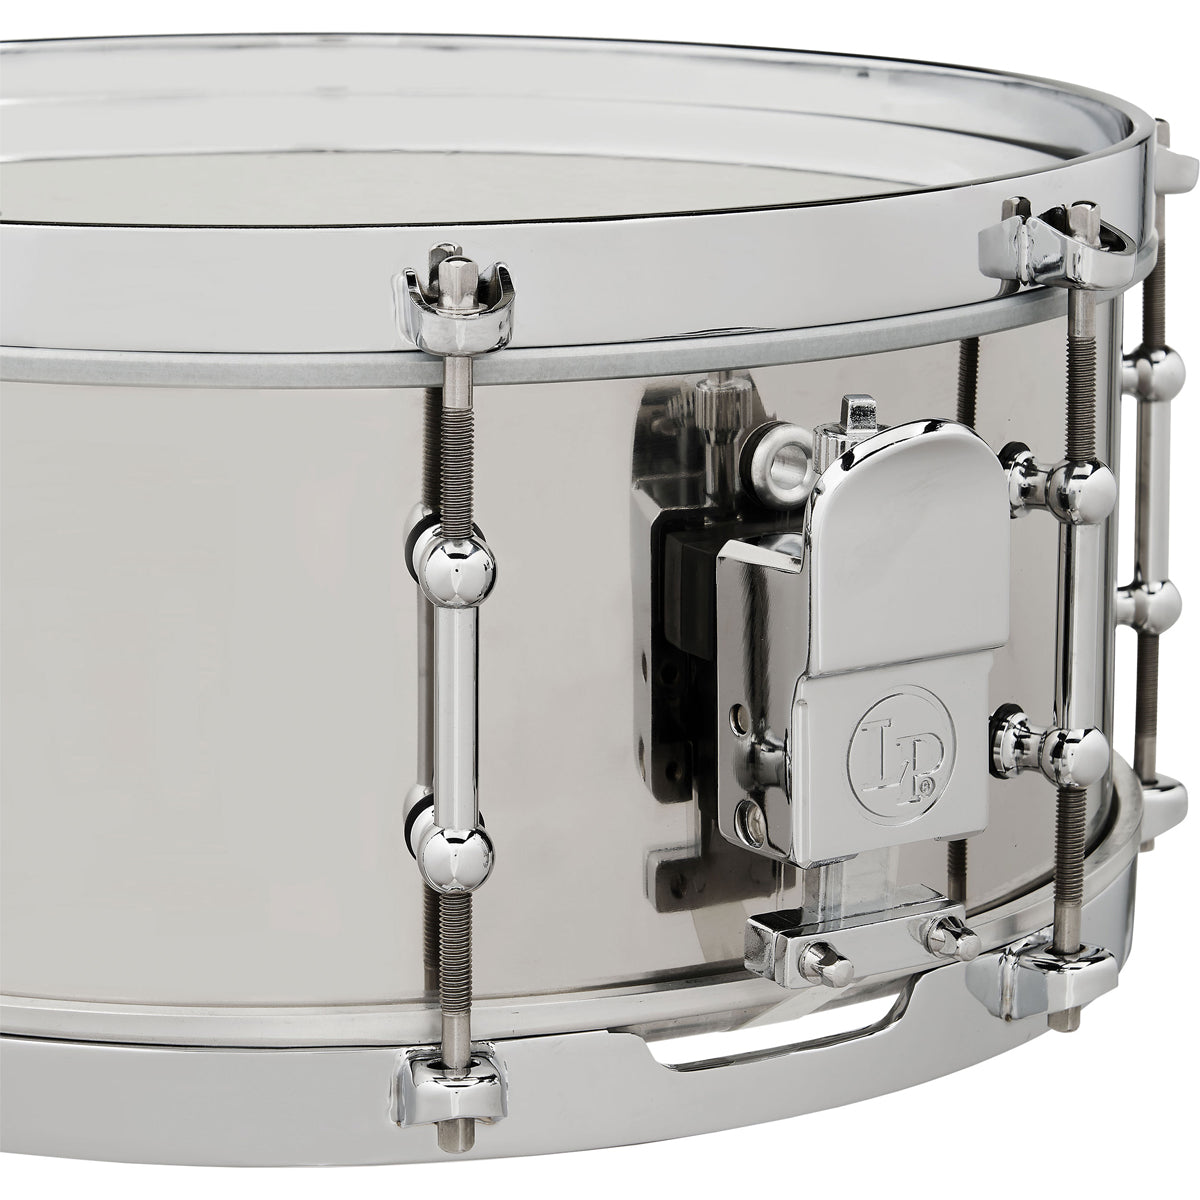 LP Percussion LP5513 13"x5.5" Stainless Steel Salsa Snare